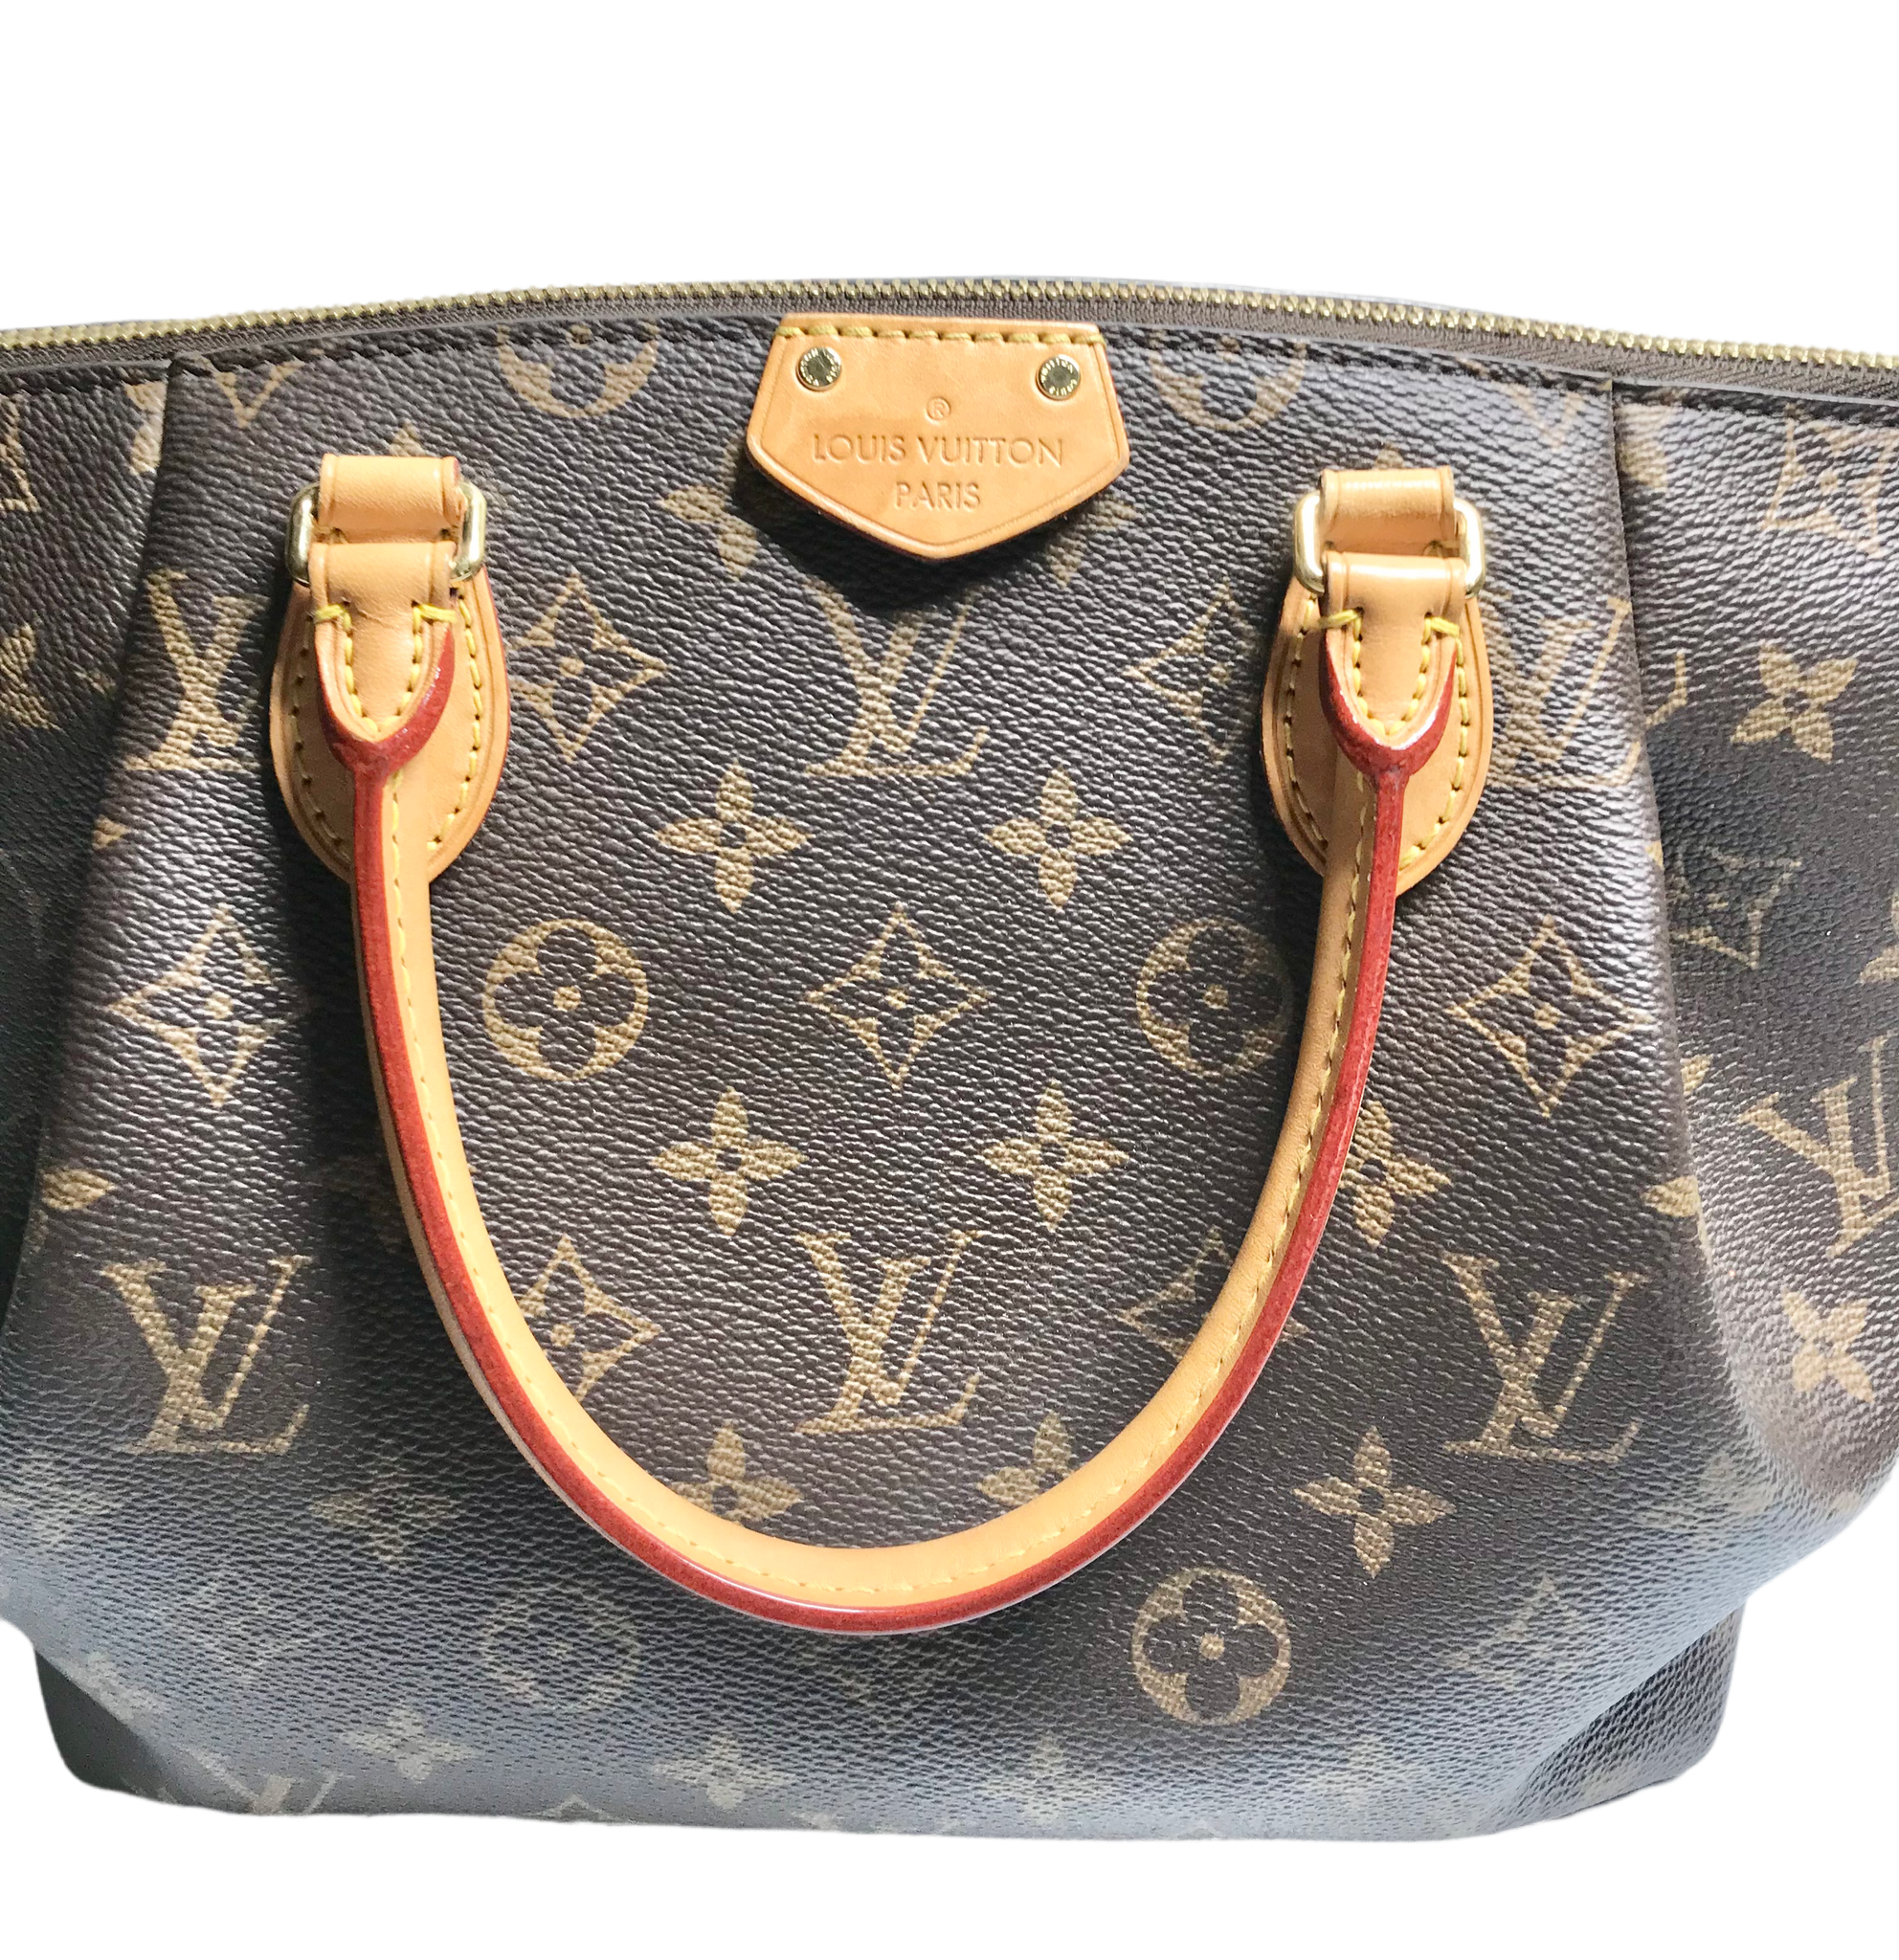 🔥Sold🔥Gorgeous Louis Vuitton Turenne PM Monogram In very excellent  condition Made in France Includes adjustable crossbody strap $1699 V…